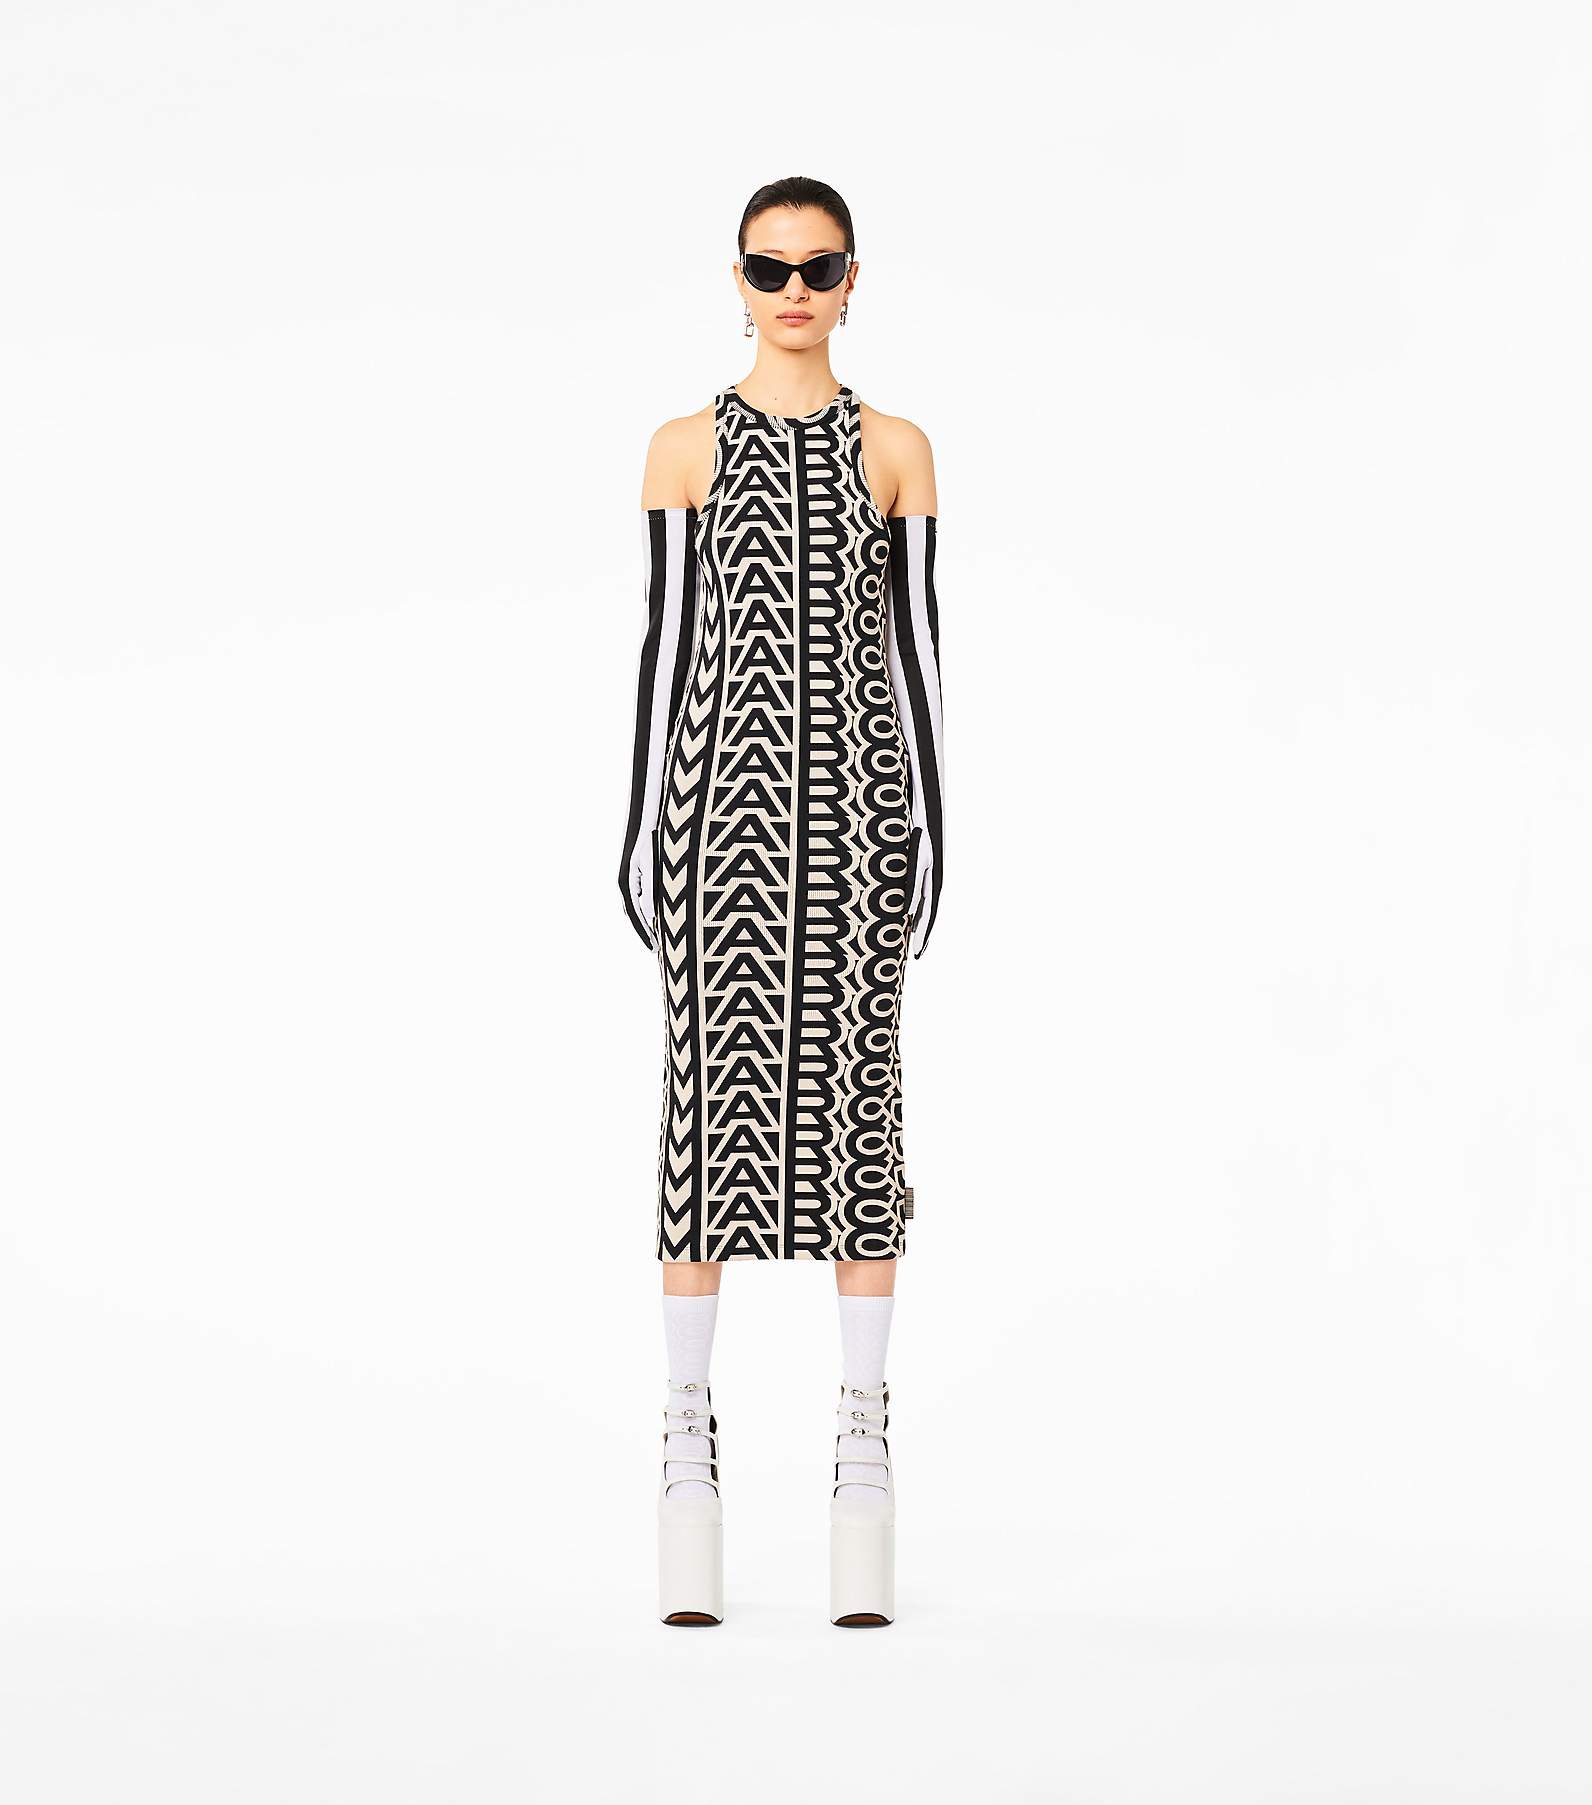 Marc Jacobs The Monogram Racer Rib Dress in Black/Ivory, Size Xs